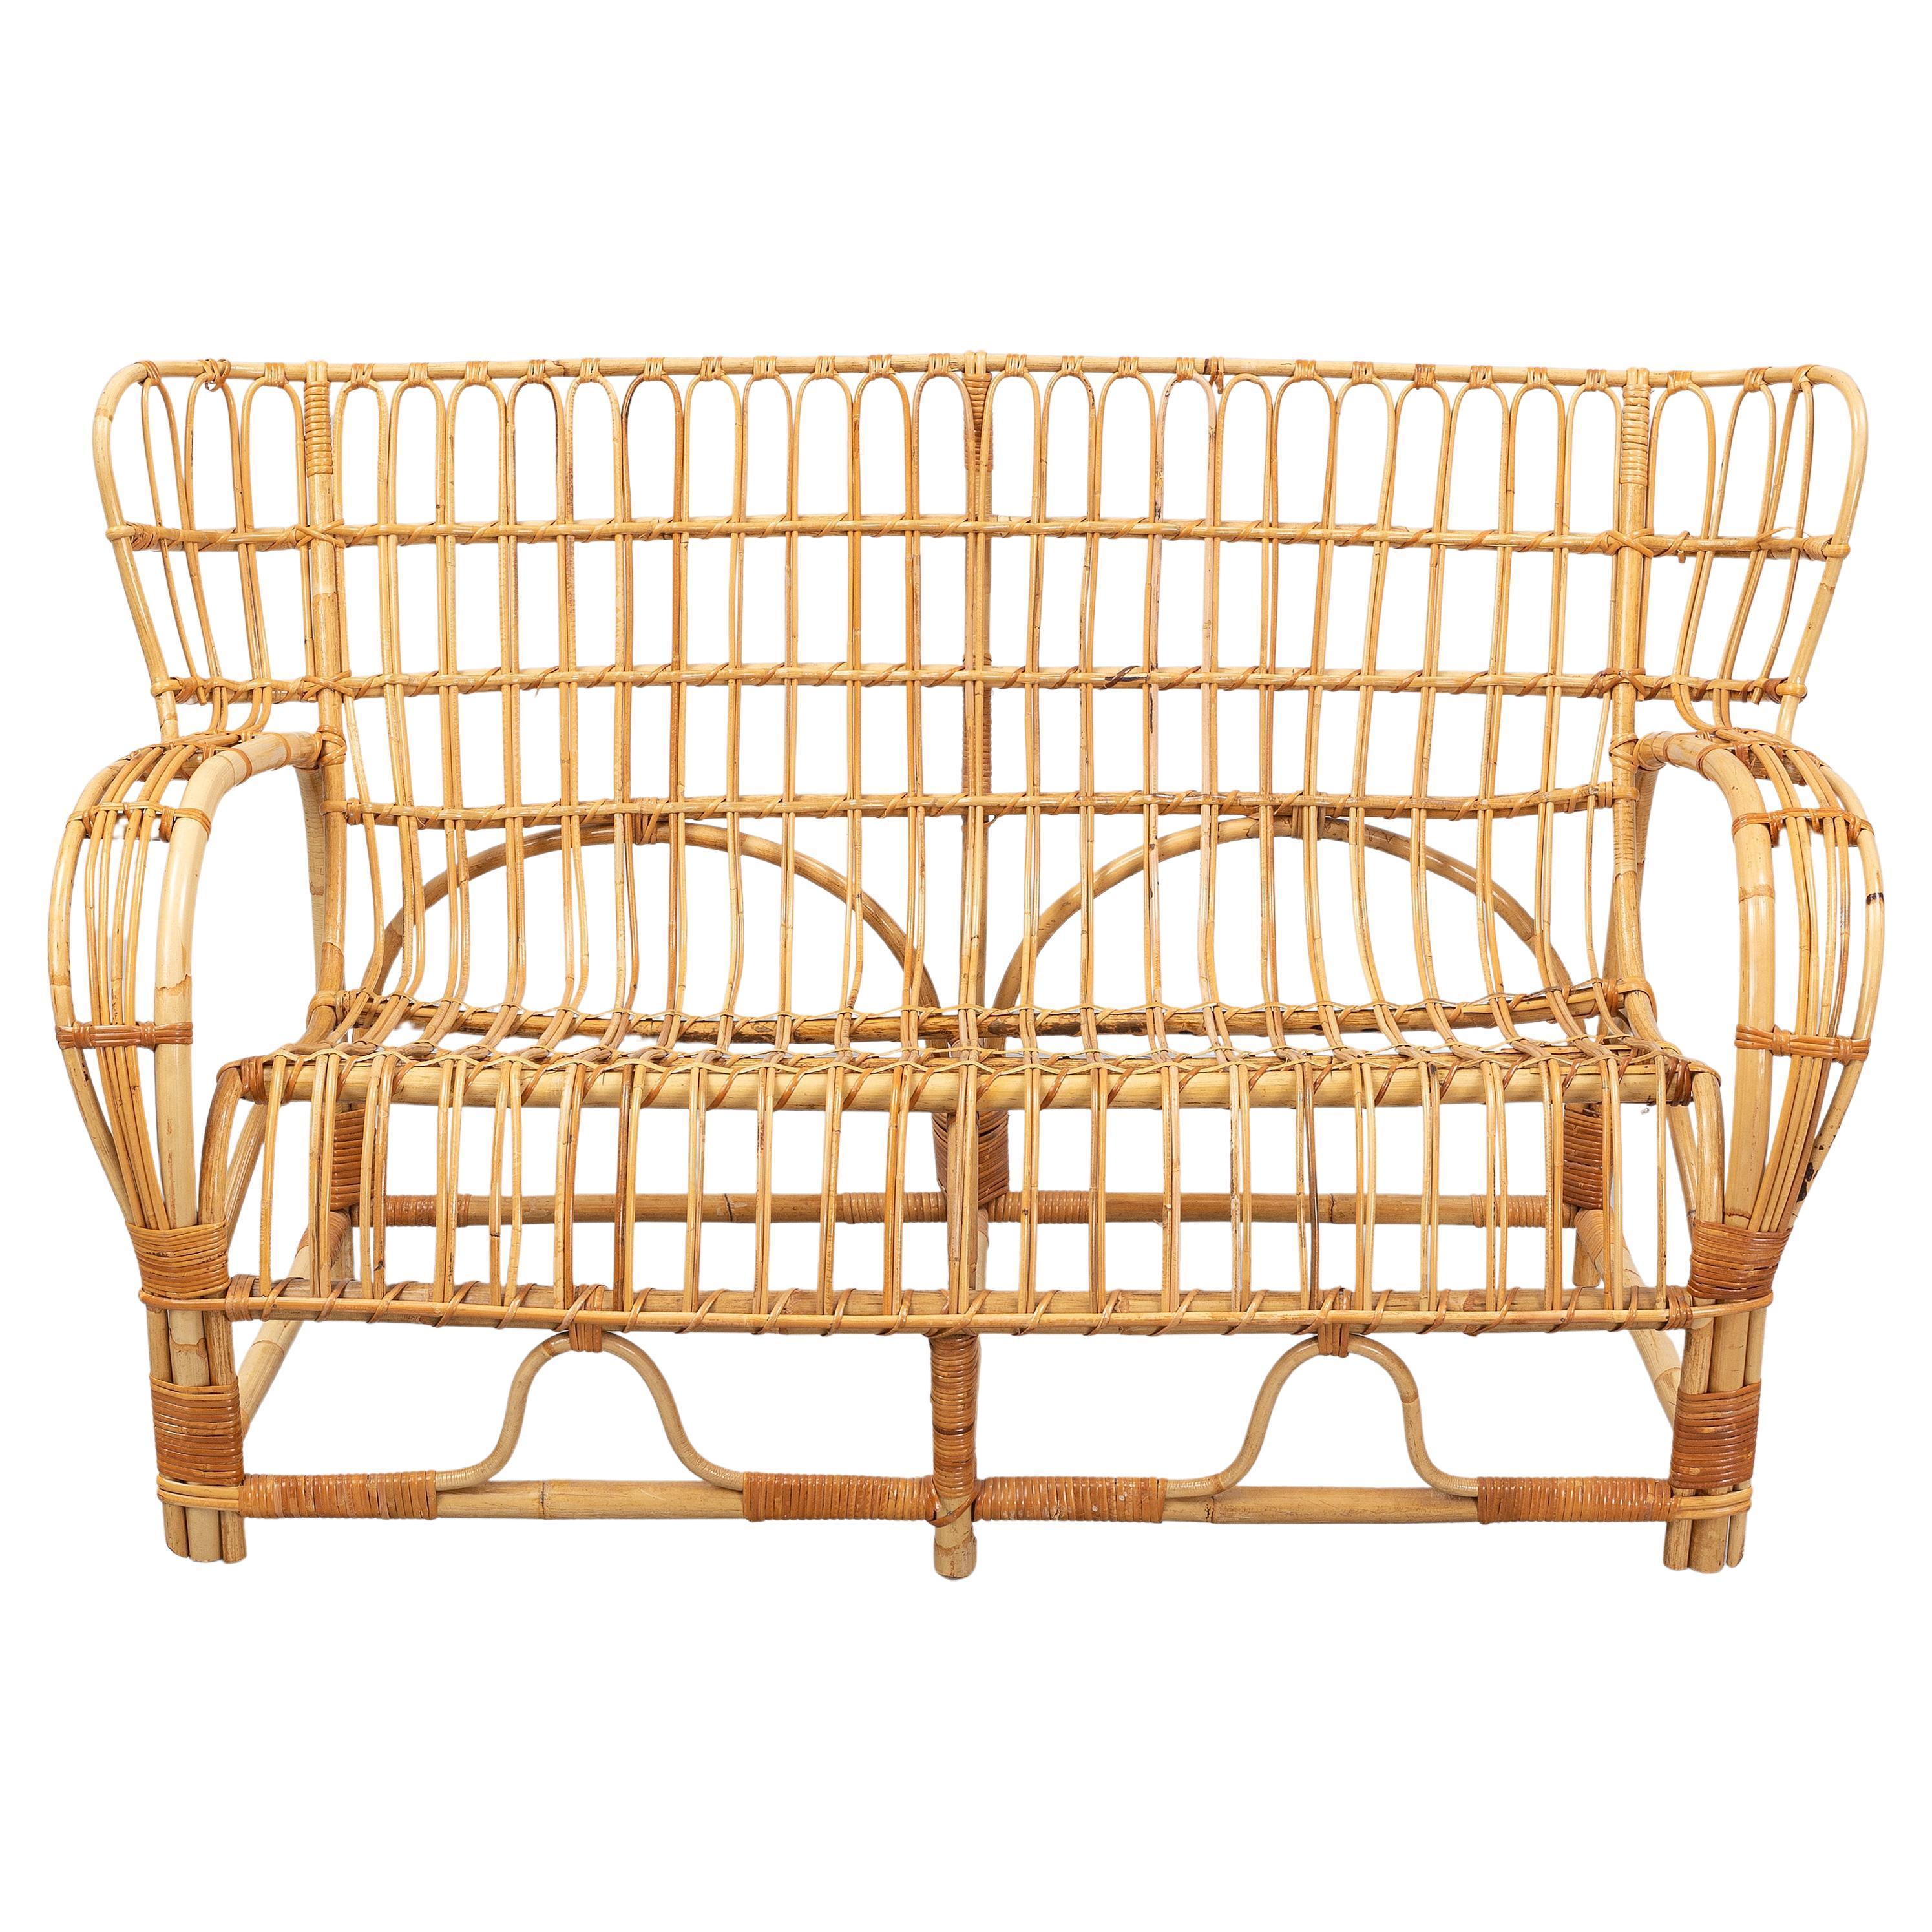 Rattan and Cane sofa designed by Viggo Boesen-see other listing with matching chair.
 